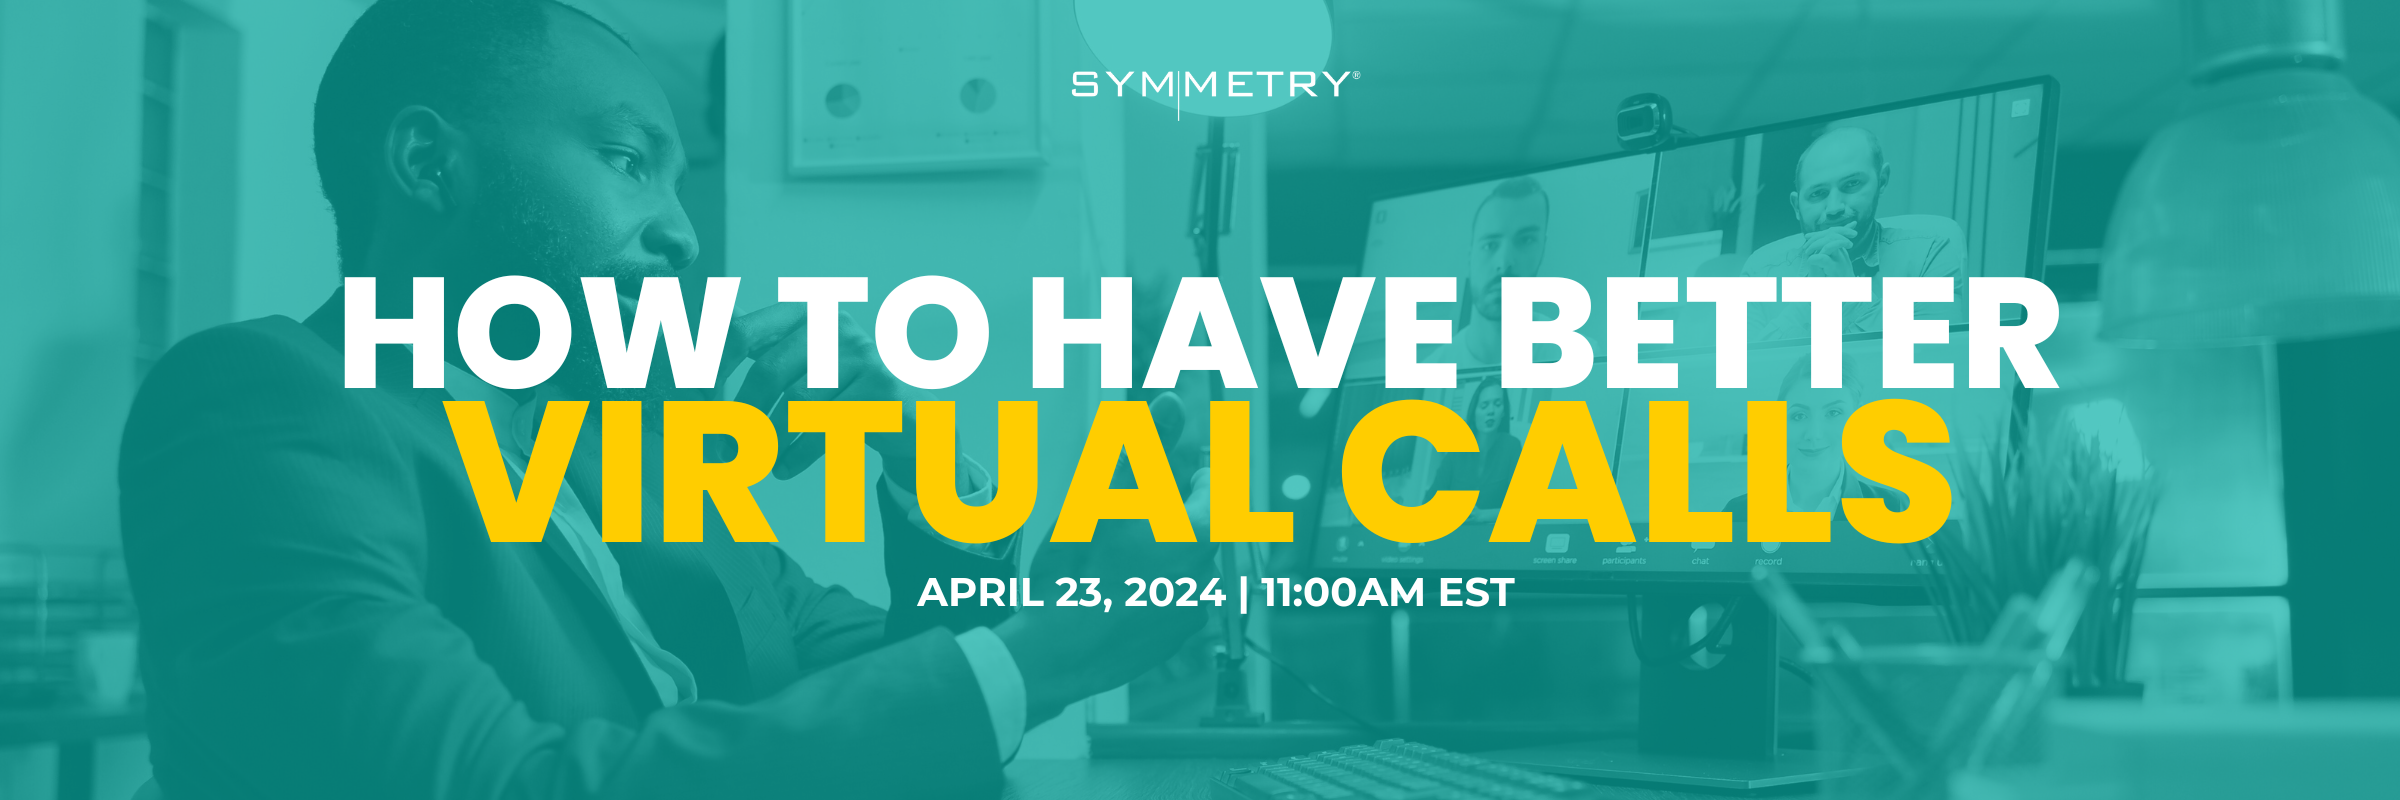 How to Have Better Virtual Calls webinar